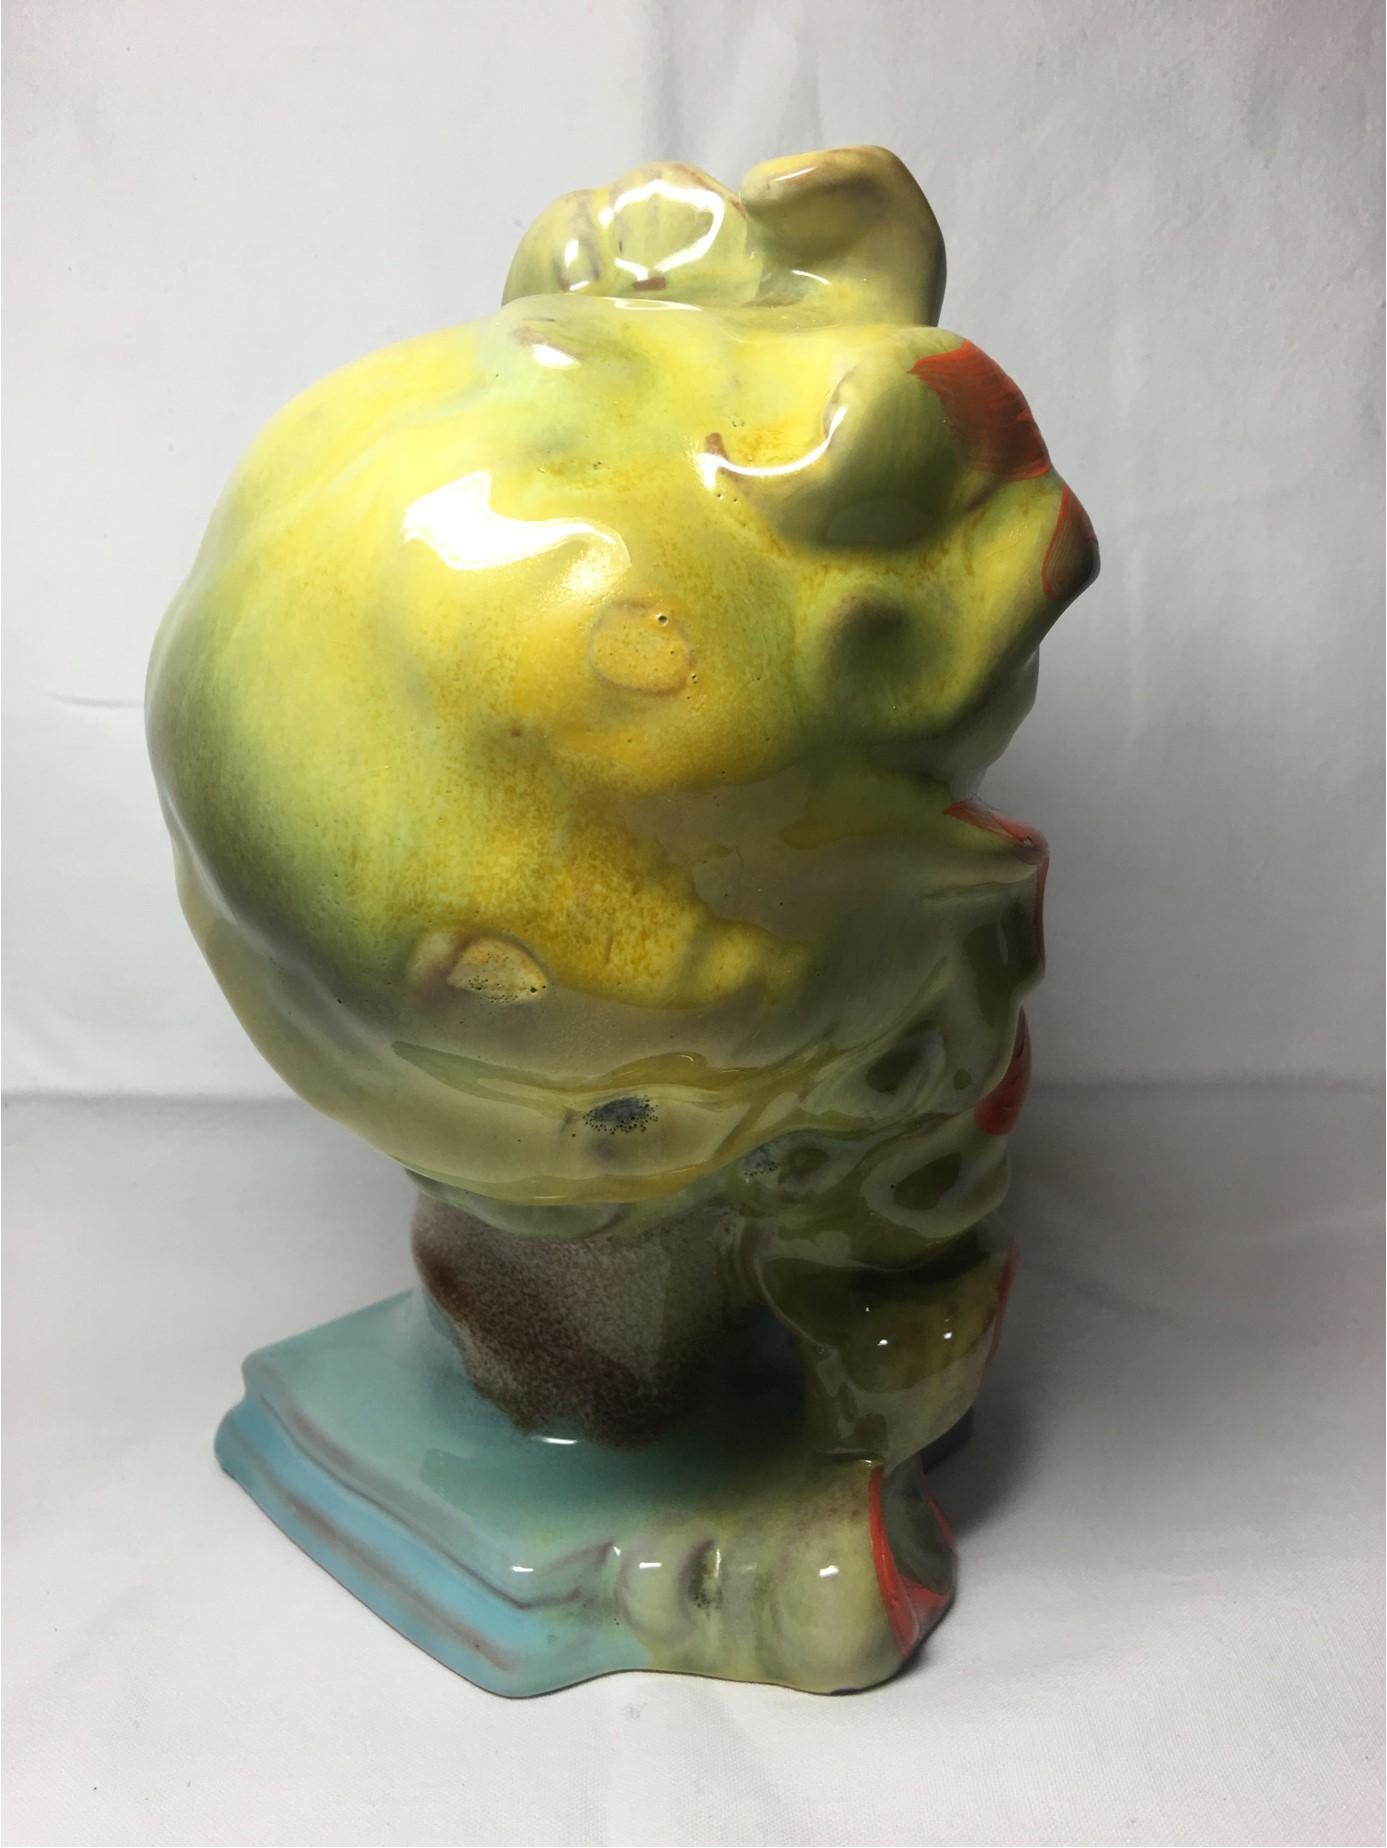 Mid-20th Century Expressive Art Deco Womans Ceramic Head from the Late 1930s Early 1940s For Sale